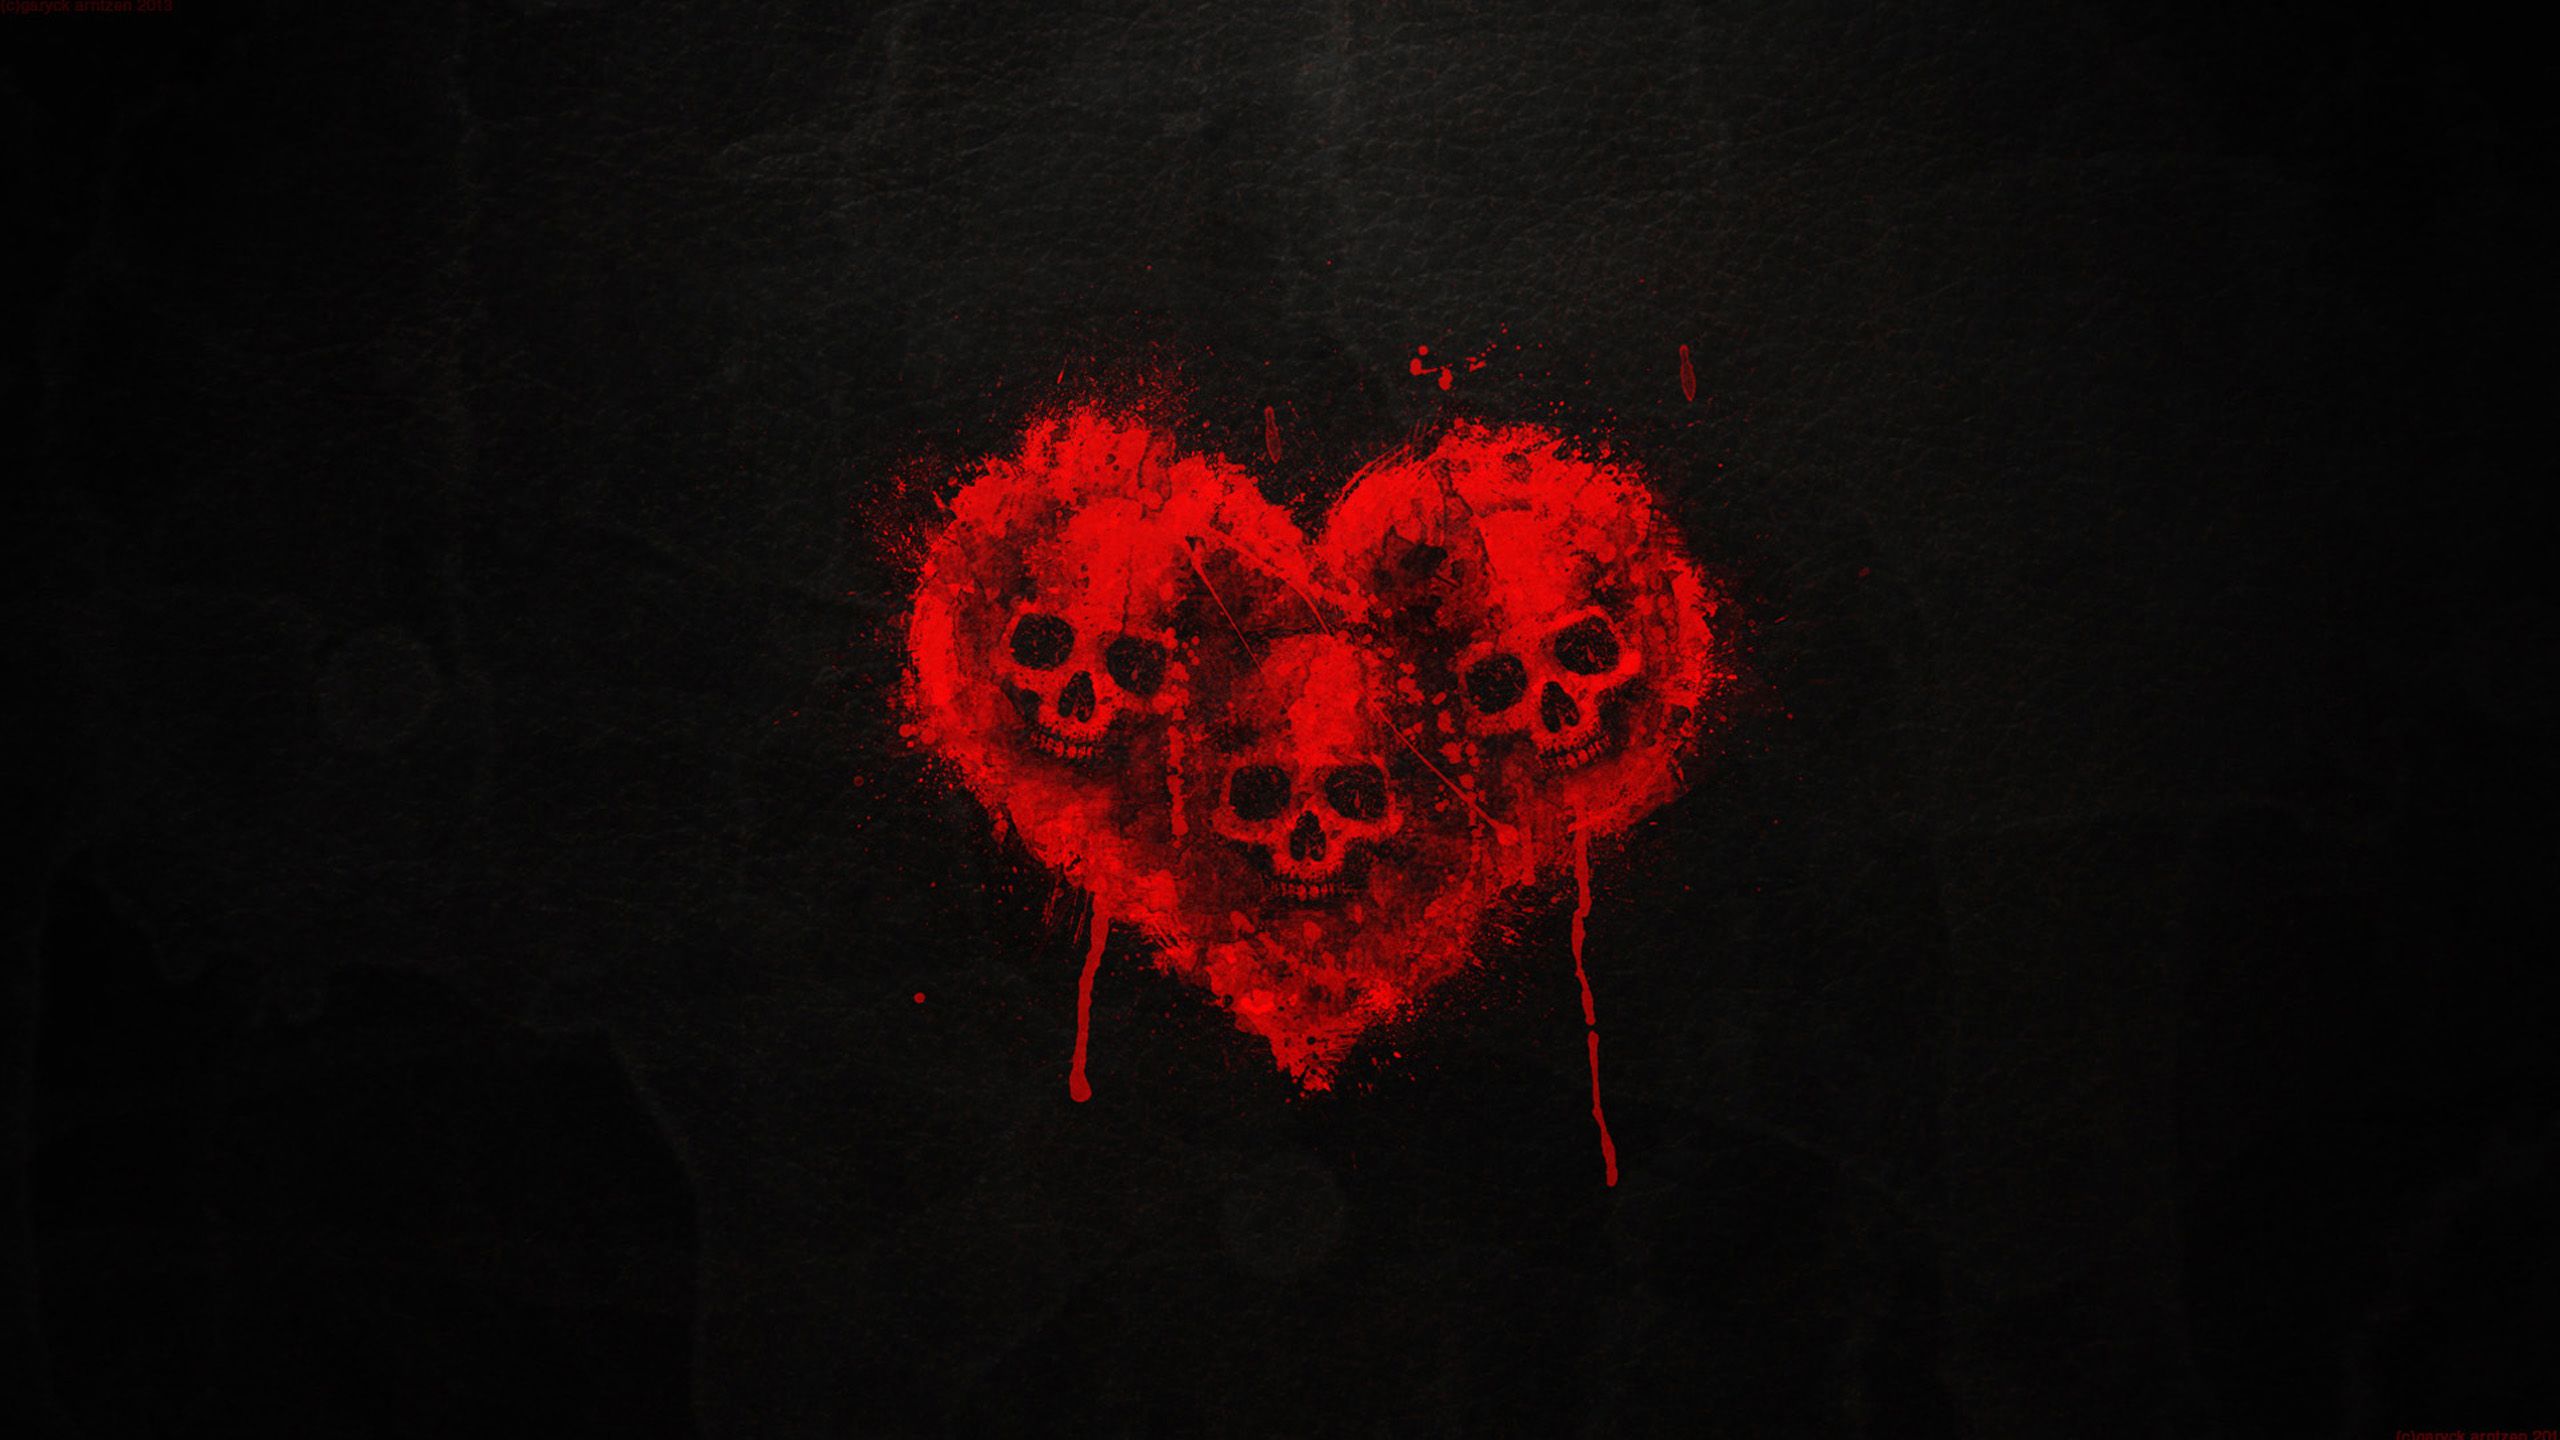 Artistic Heart Painting Red Skull 2560x1440